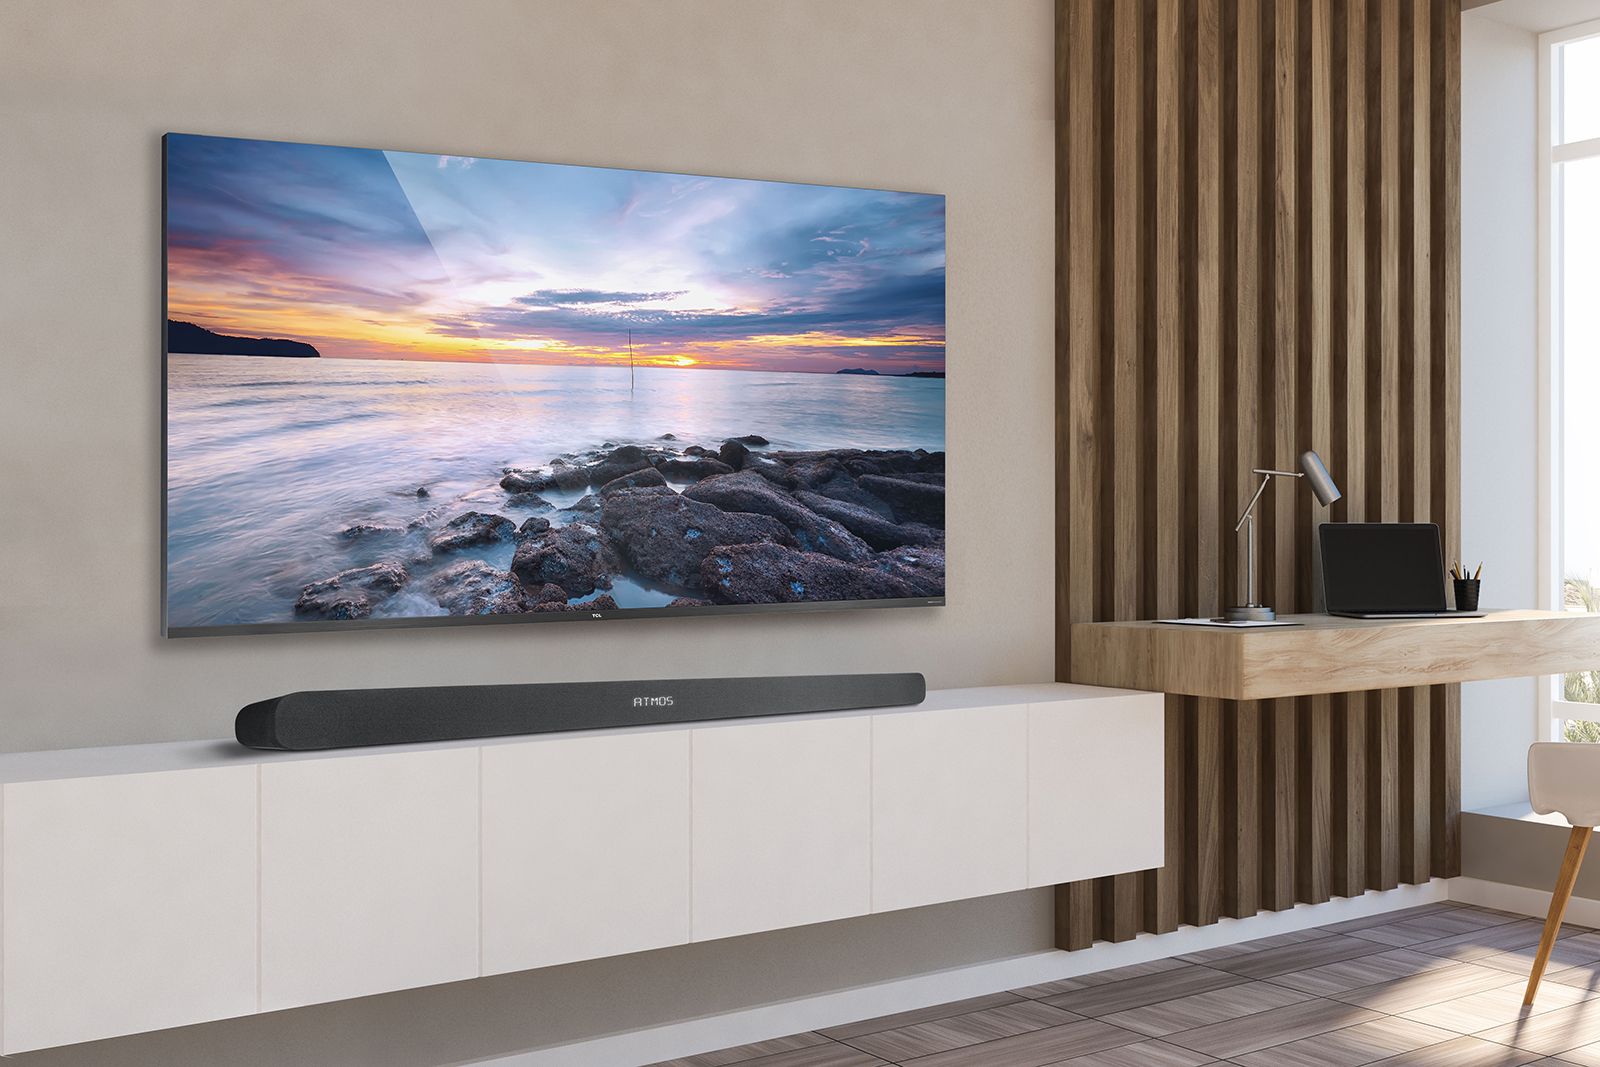 TCL releases trio of affordable soundbars in UK, TS8111 comes with Dolby Atmos photo 1